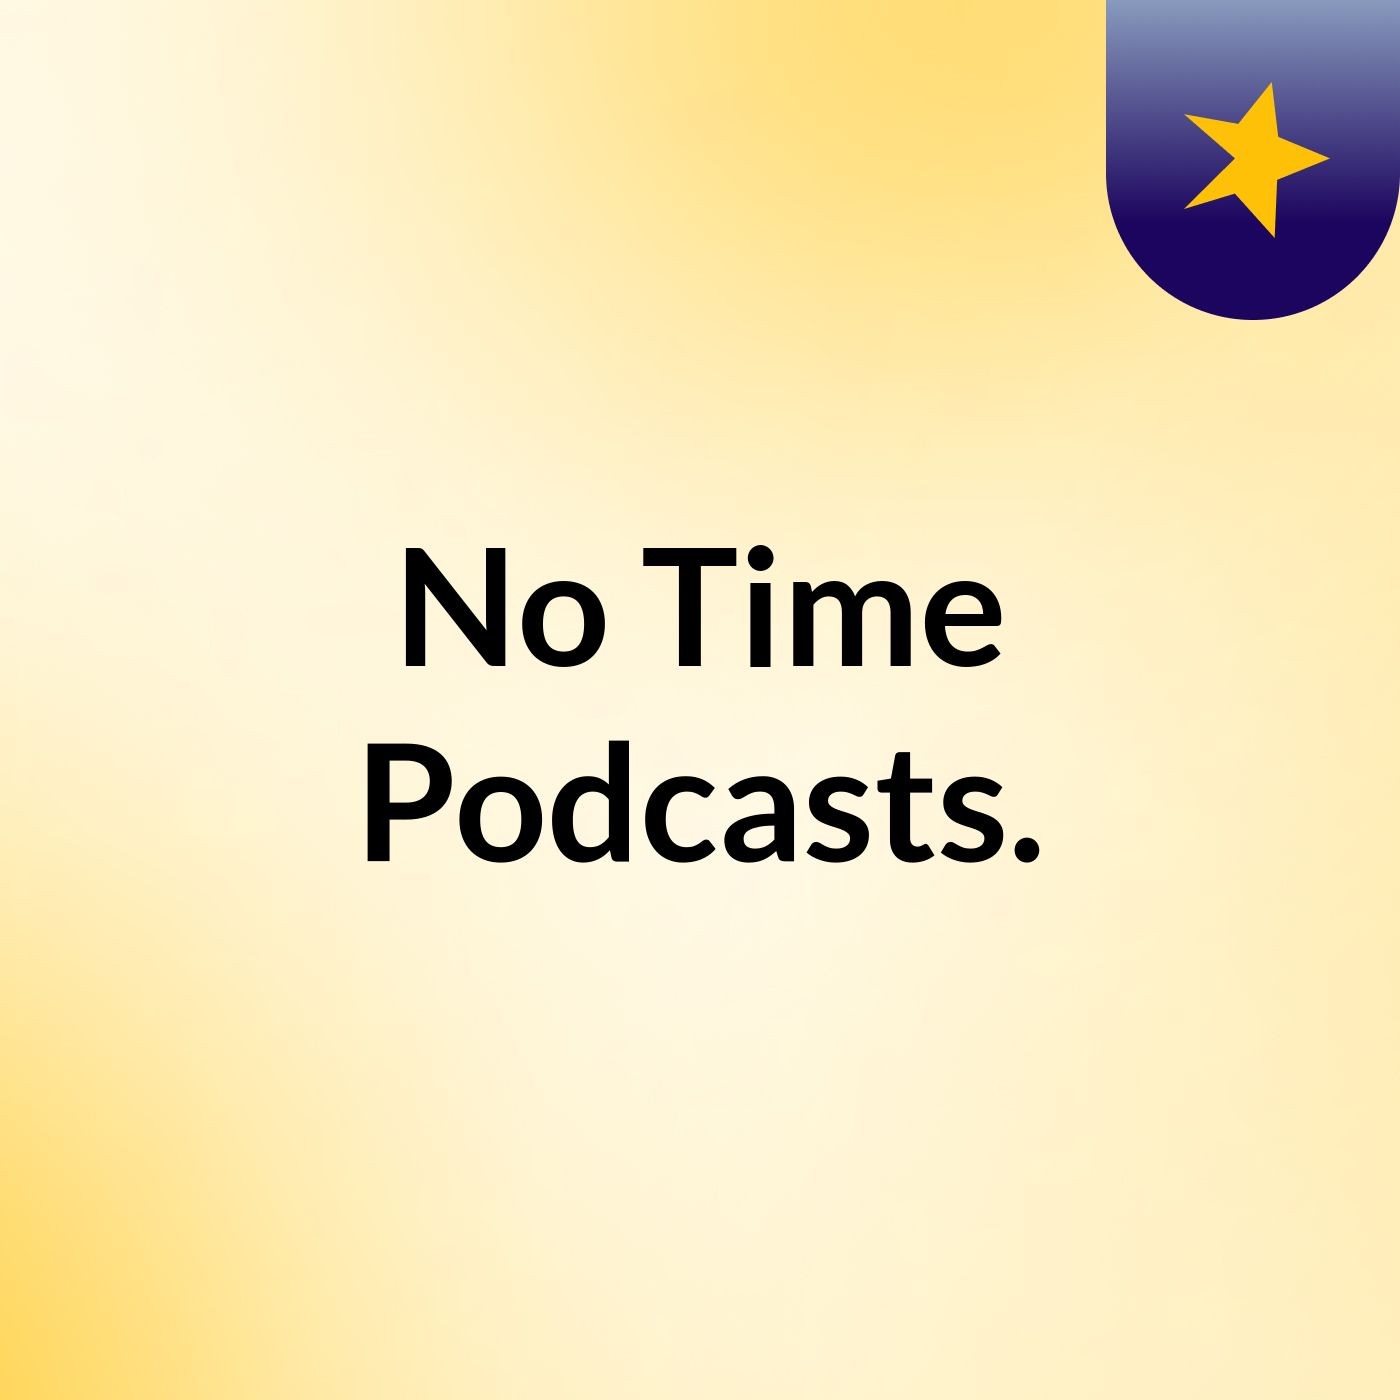 No Time Podcasts: Help is here!